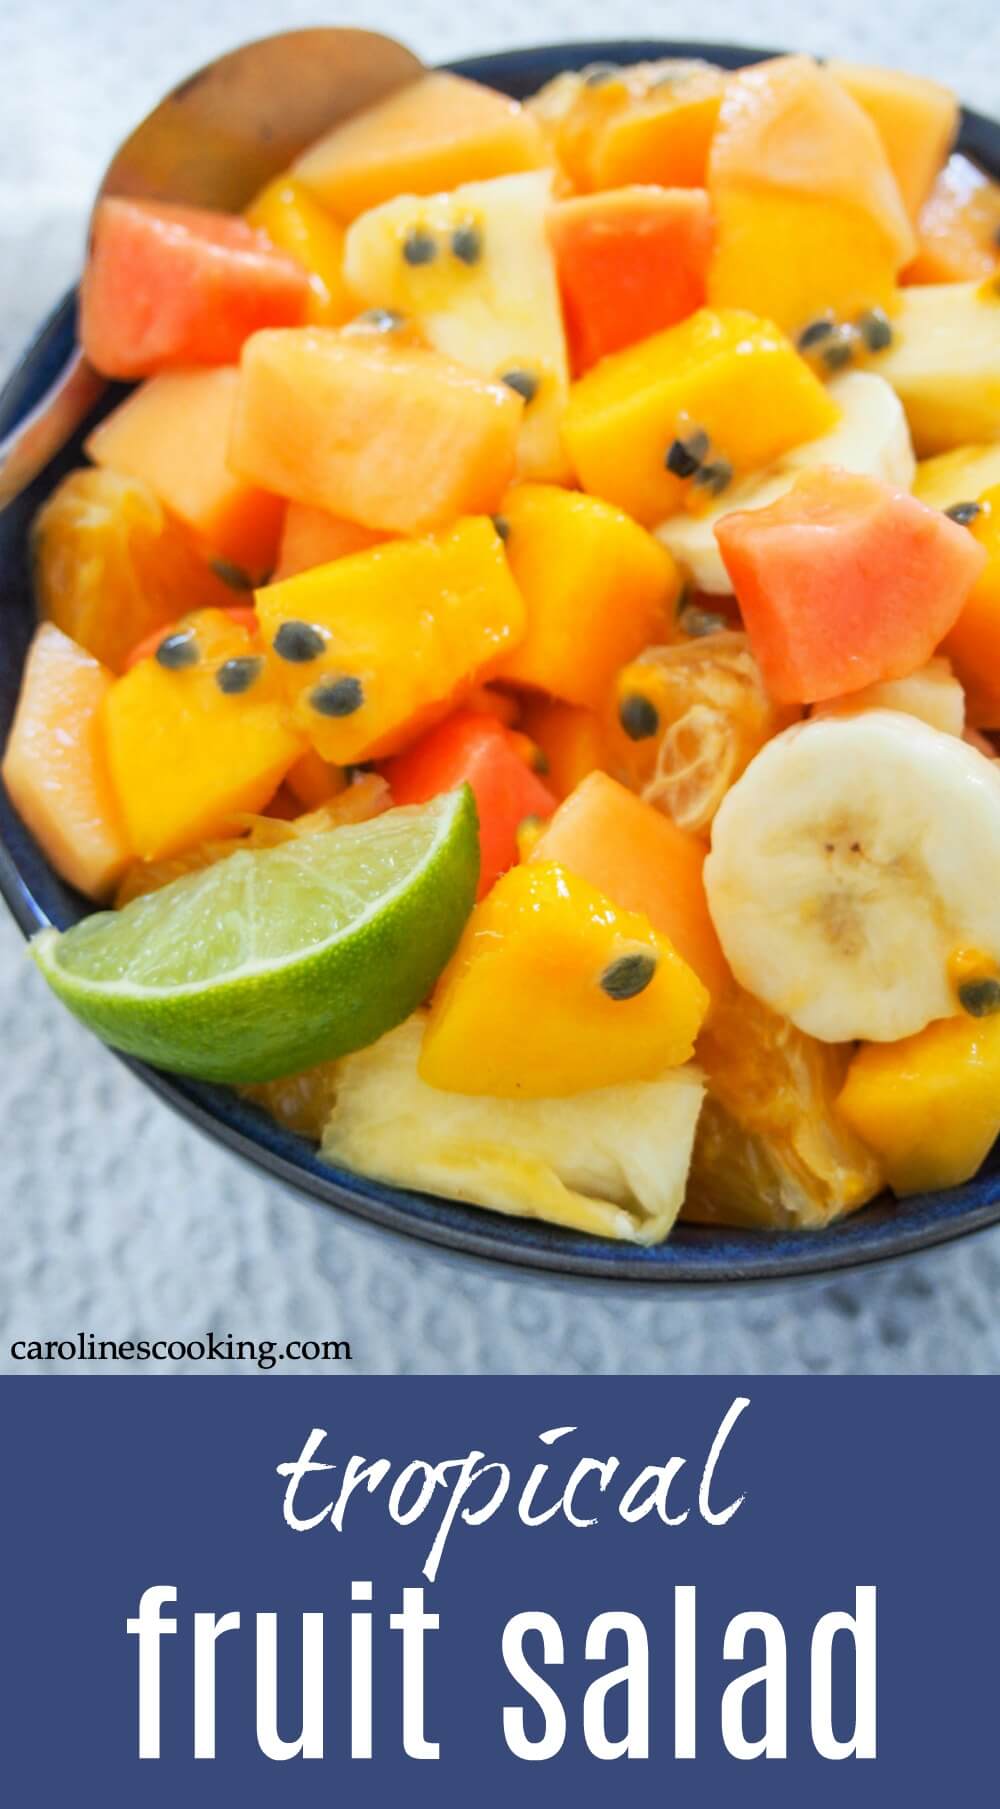 This tropical fruit salad is great for breakfast or brunch, either as it is or alongside some yogurt.  It would also be great to add as a side for a potluck or BBQ or enjoy as dessert.  Plus, it's as easy as chopping up a few fruits and mixing the dressing, but the result is a wonderfully tasty mix of fresh flavors.  Easy, versatile and delicious: in other words, try it soon!  #fruit #salad #tropicalfruit #potluck #brunch